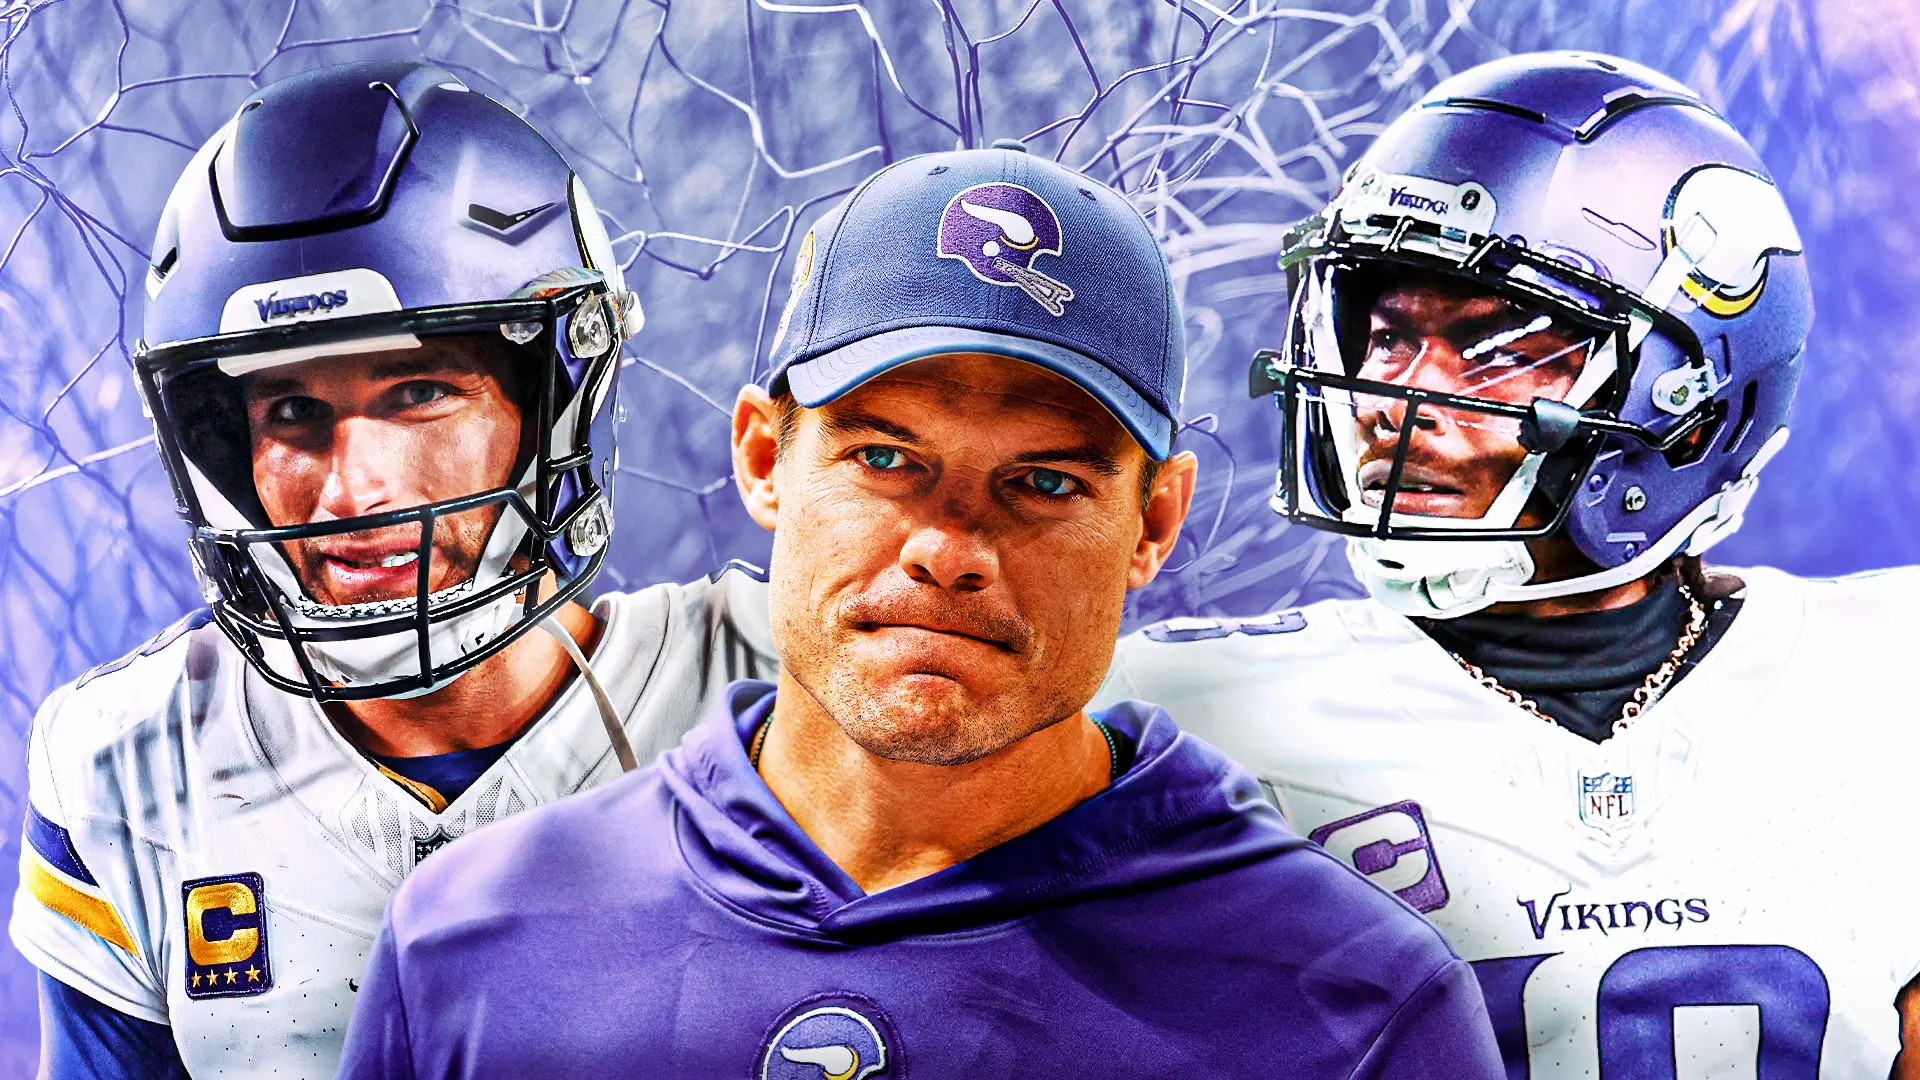 Minnesota Vikings Are In Trouble, Luck Is Turning